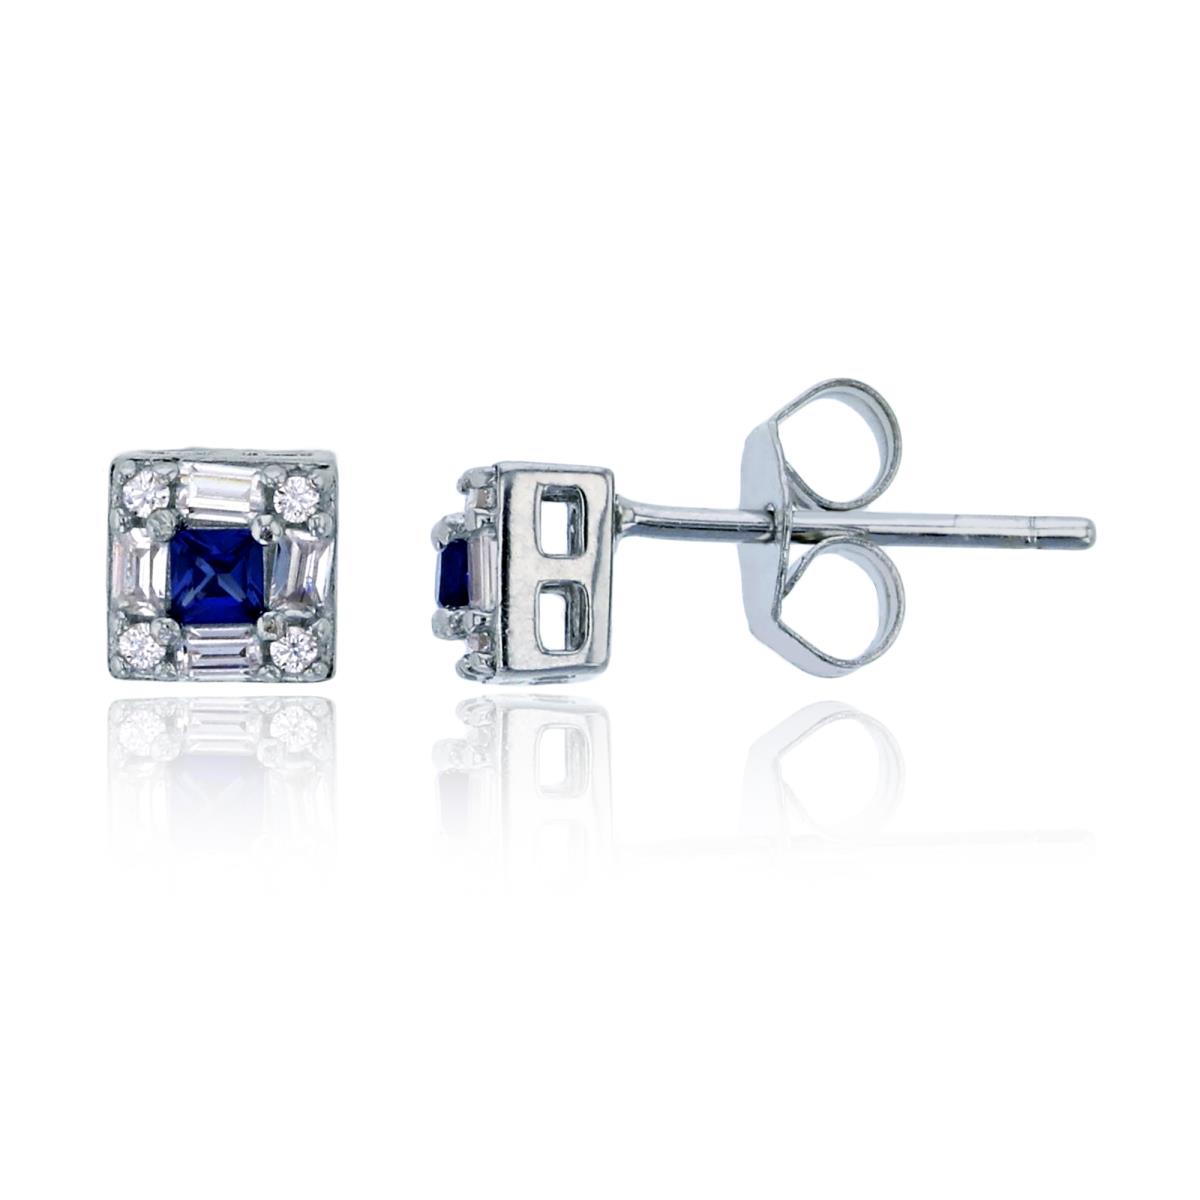 Sterling Silver Rhodium Pave 5mm White & Blue Sapphire Glass Square Stud Earring